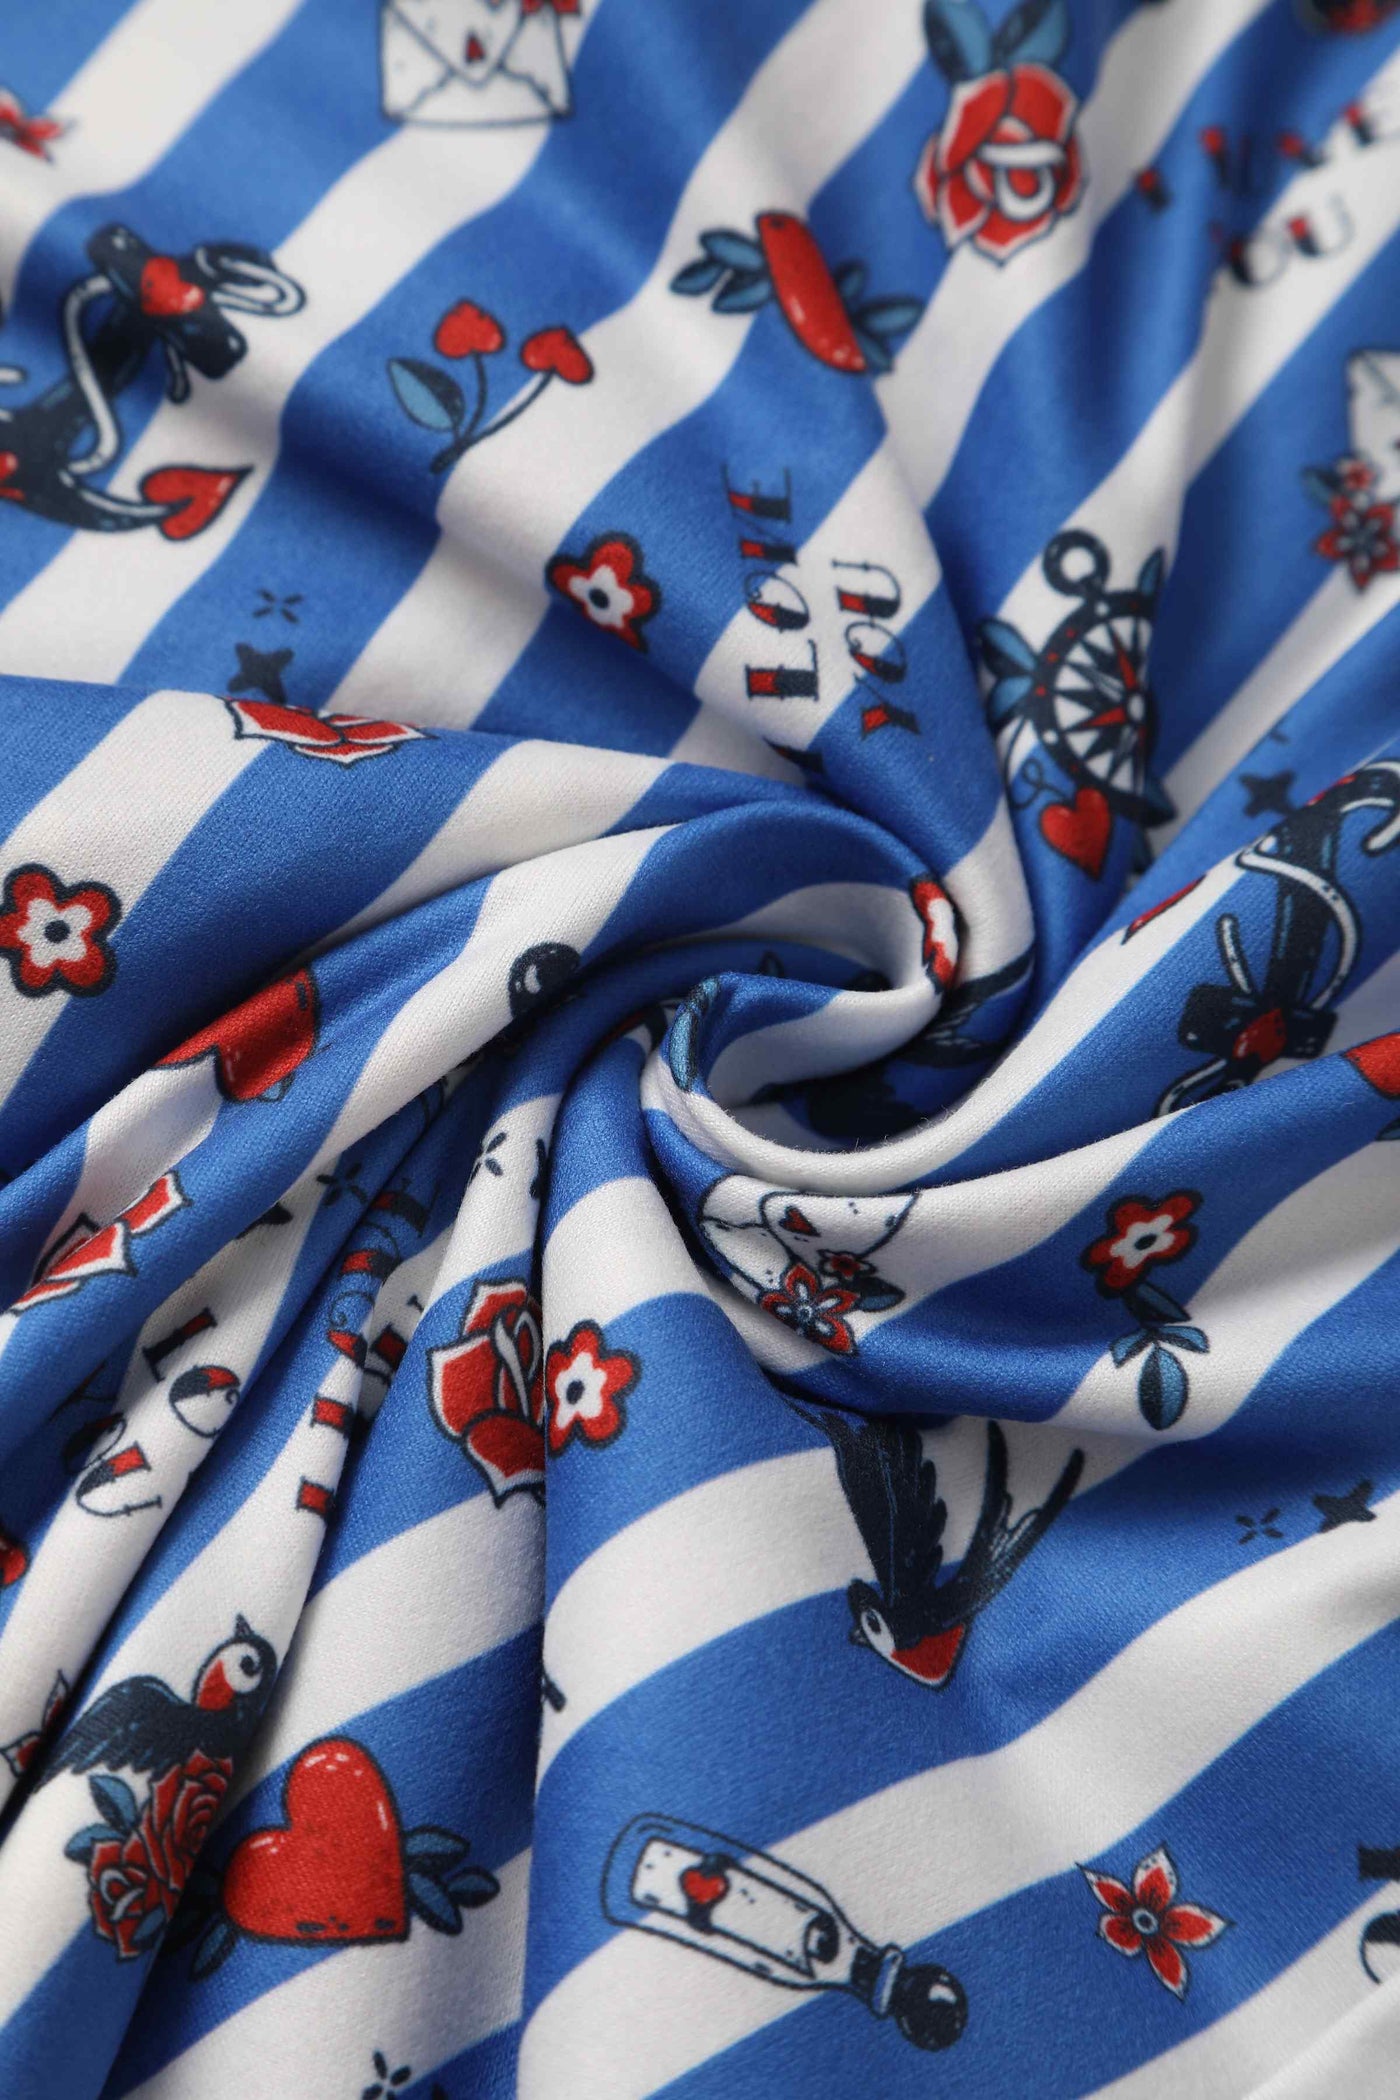 Close Up View of Old School Tattoo Prin with Blue and White Stripes Wrap Dress